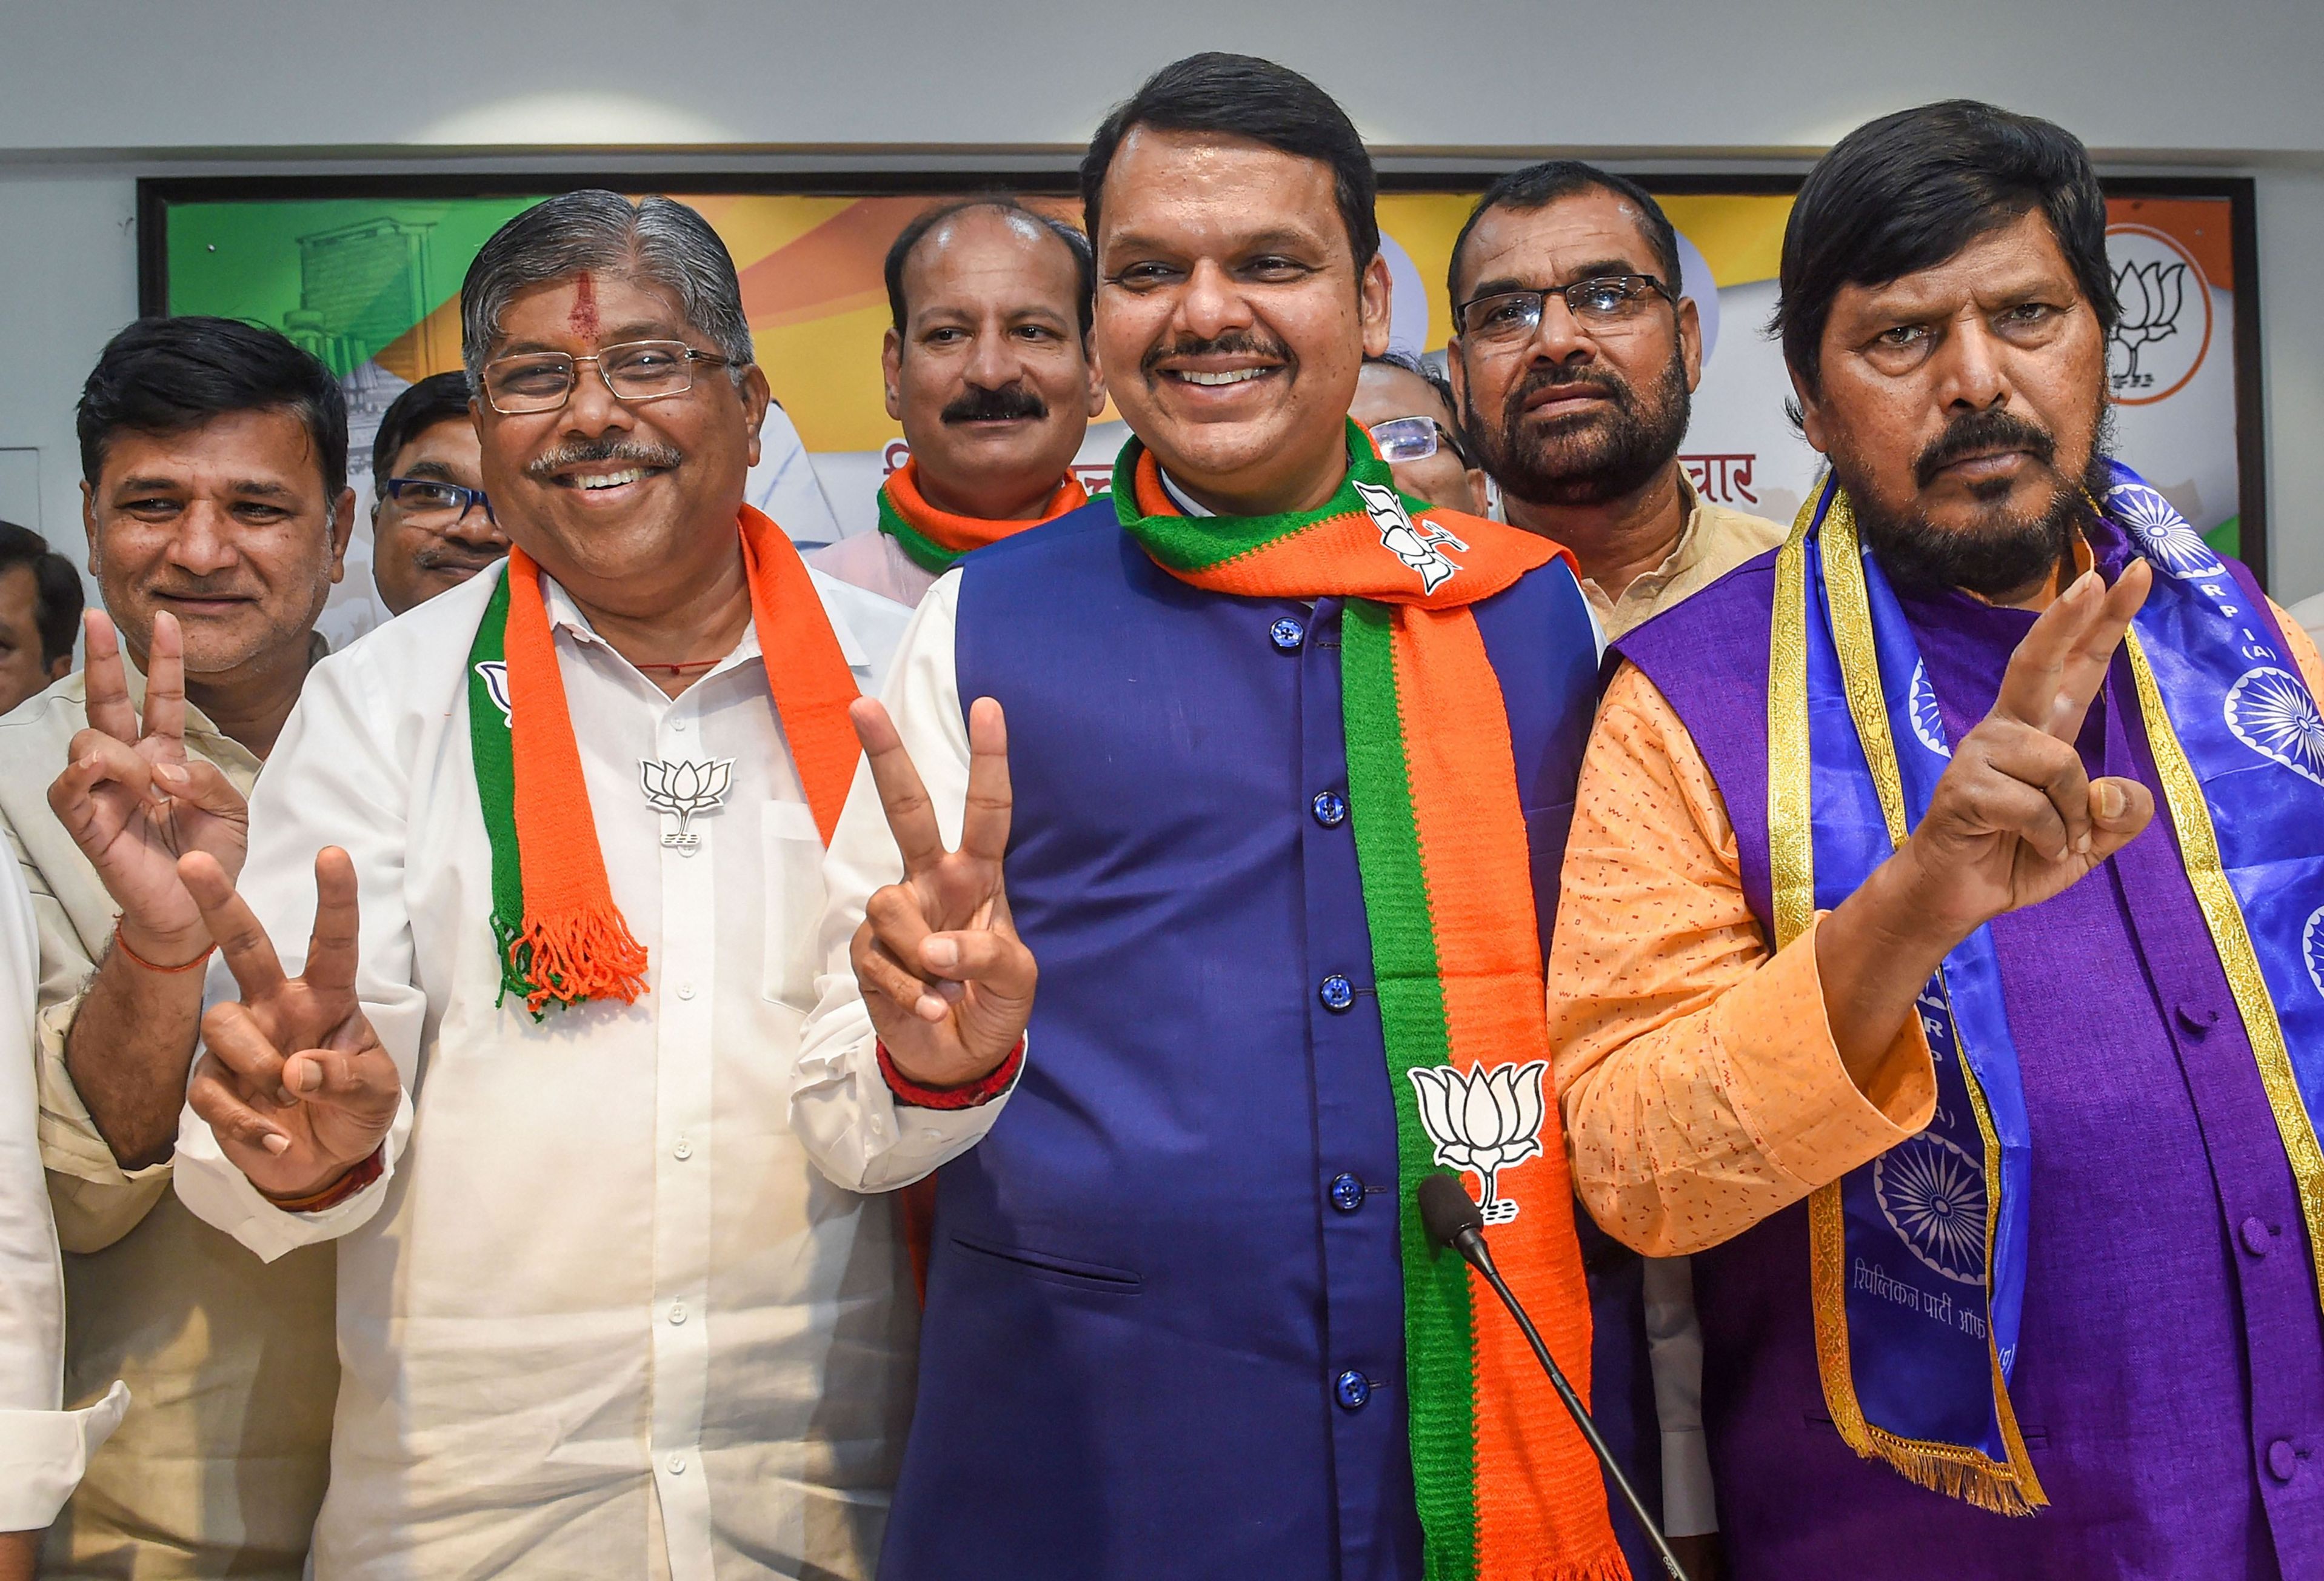 (From left to right) Maharashtra BJP president Chandrakant Patil, stat chief minister Devendra Fadnavis and RPI chief Ramdas Athawale flash victory signs as they celebrate their win in Maharashtra Assembly elections, in Mumbai, Thursday, October 24, 2019.